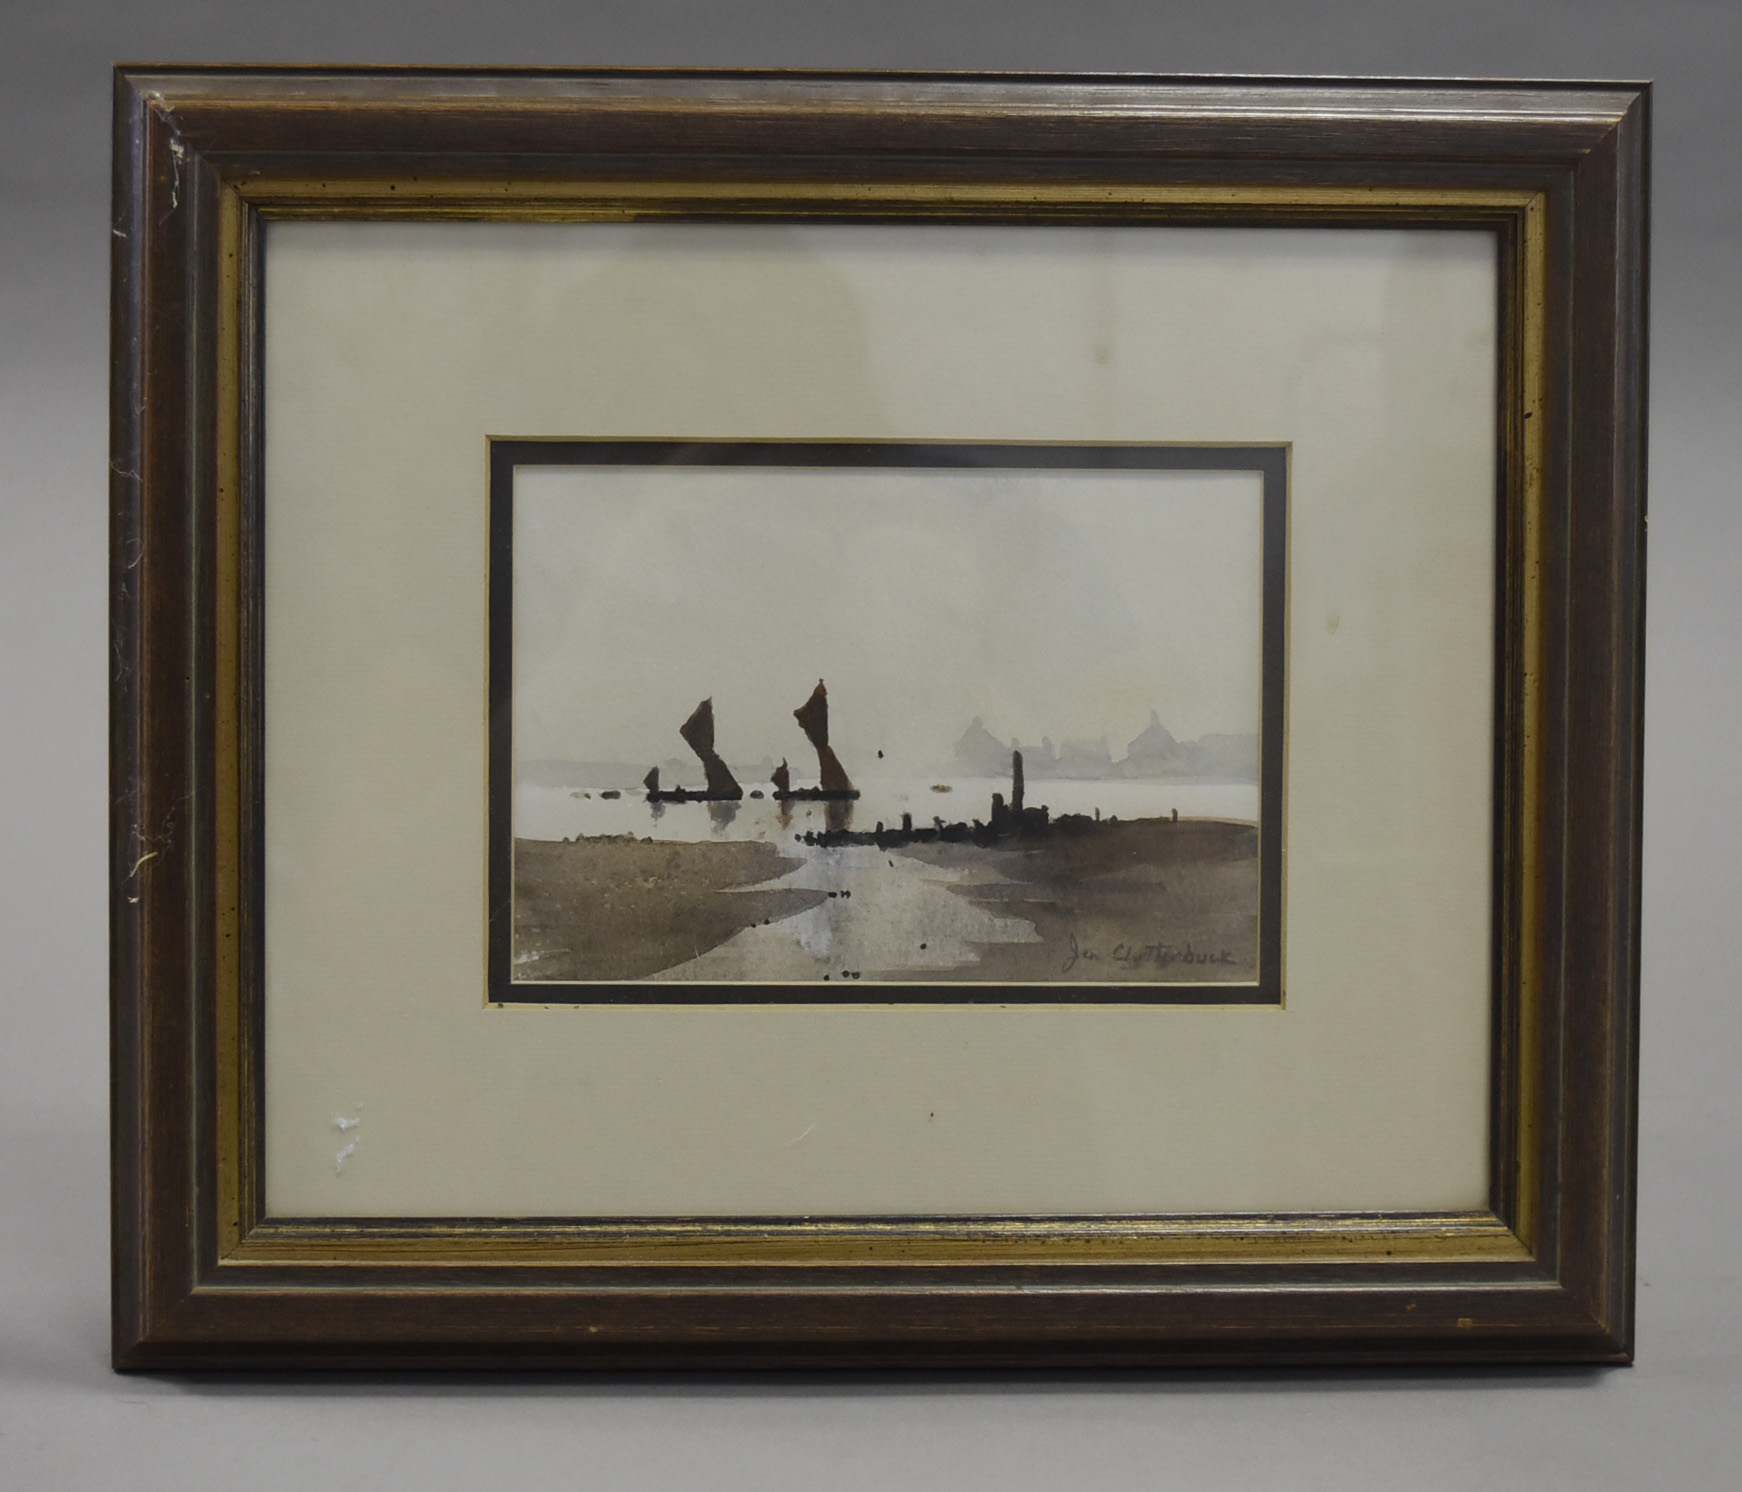 20th Century British School oil on card, 'Fishing Boats on the Beach at Night', 16 cm x 28.5 cm,; - Image 4 of 5